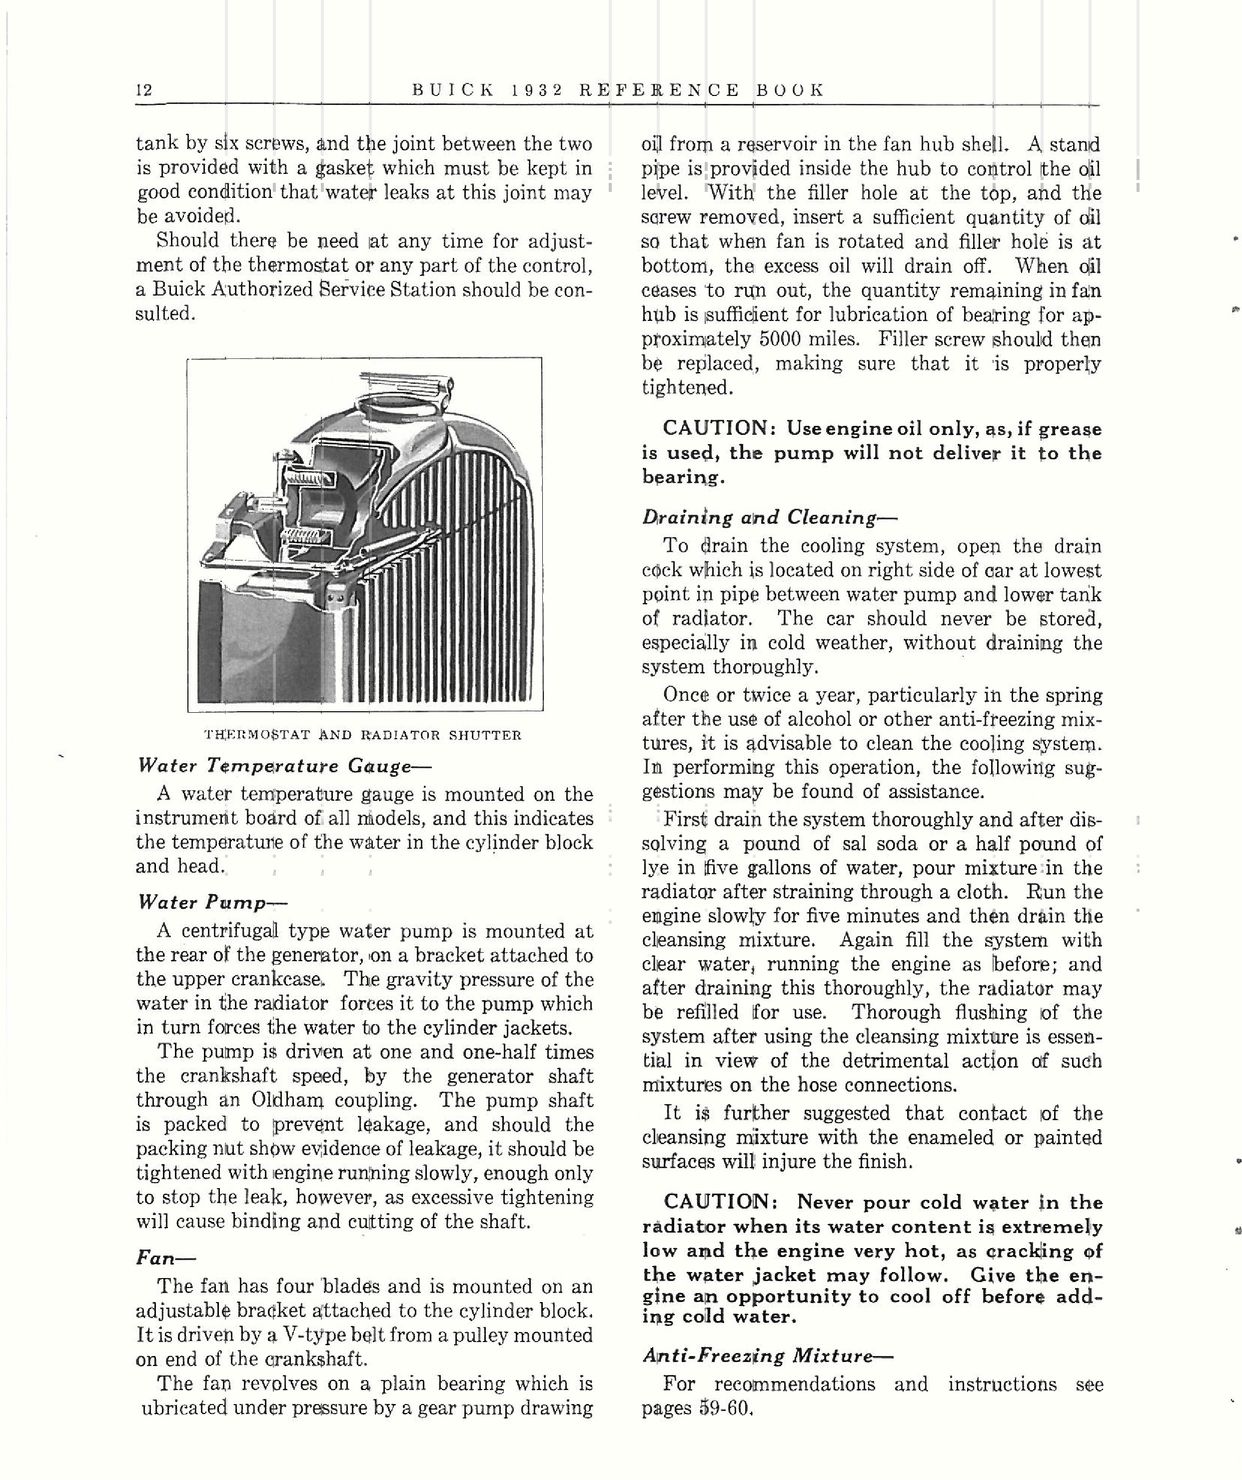 n_1932 Buick Reference Book-12.jpg